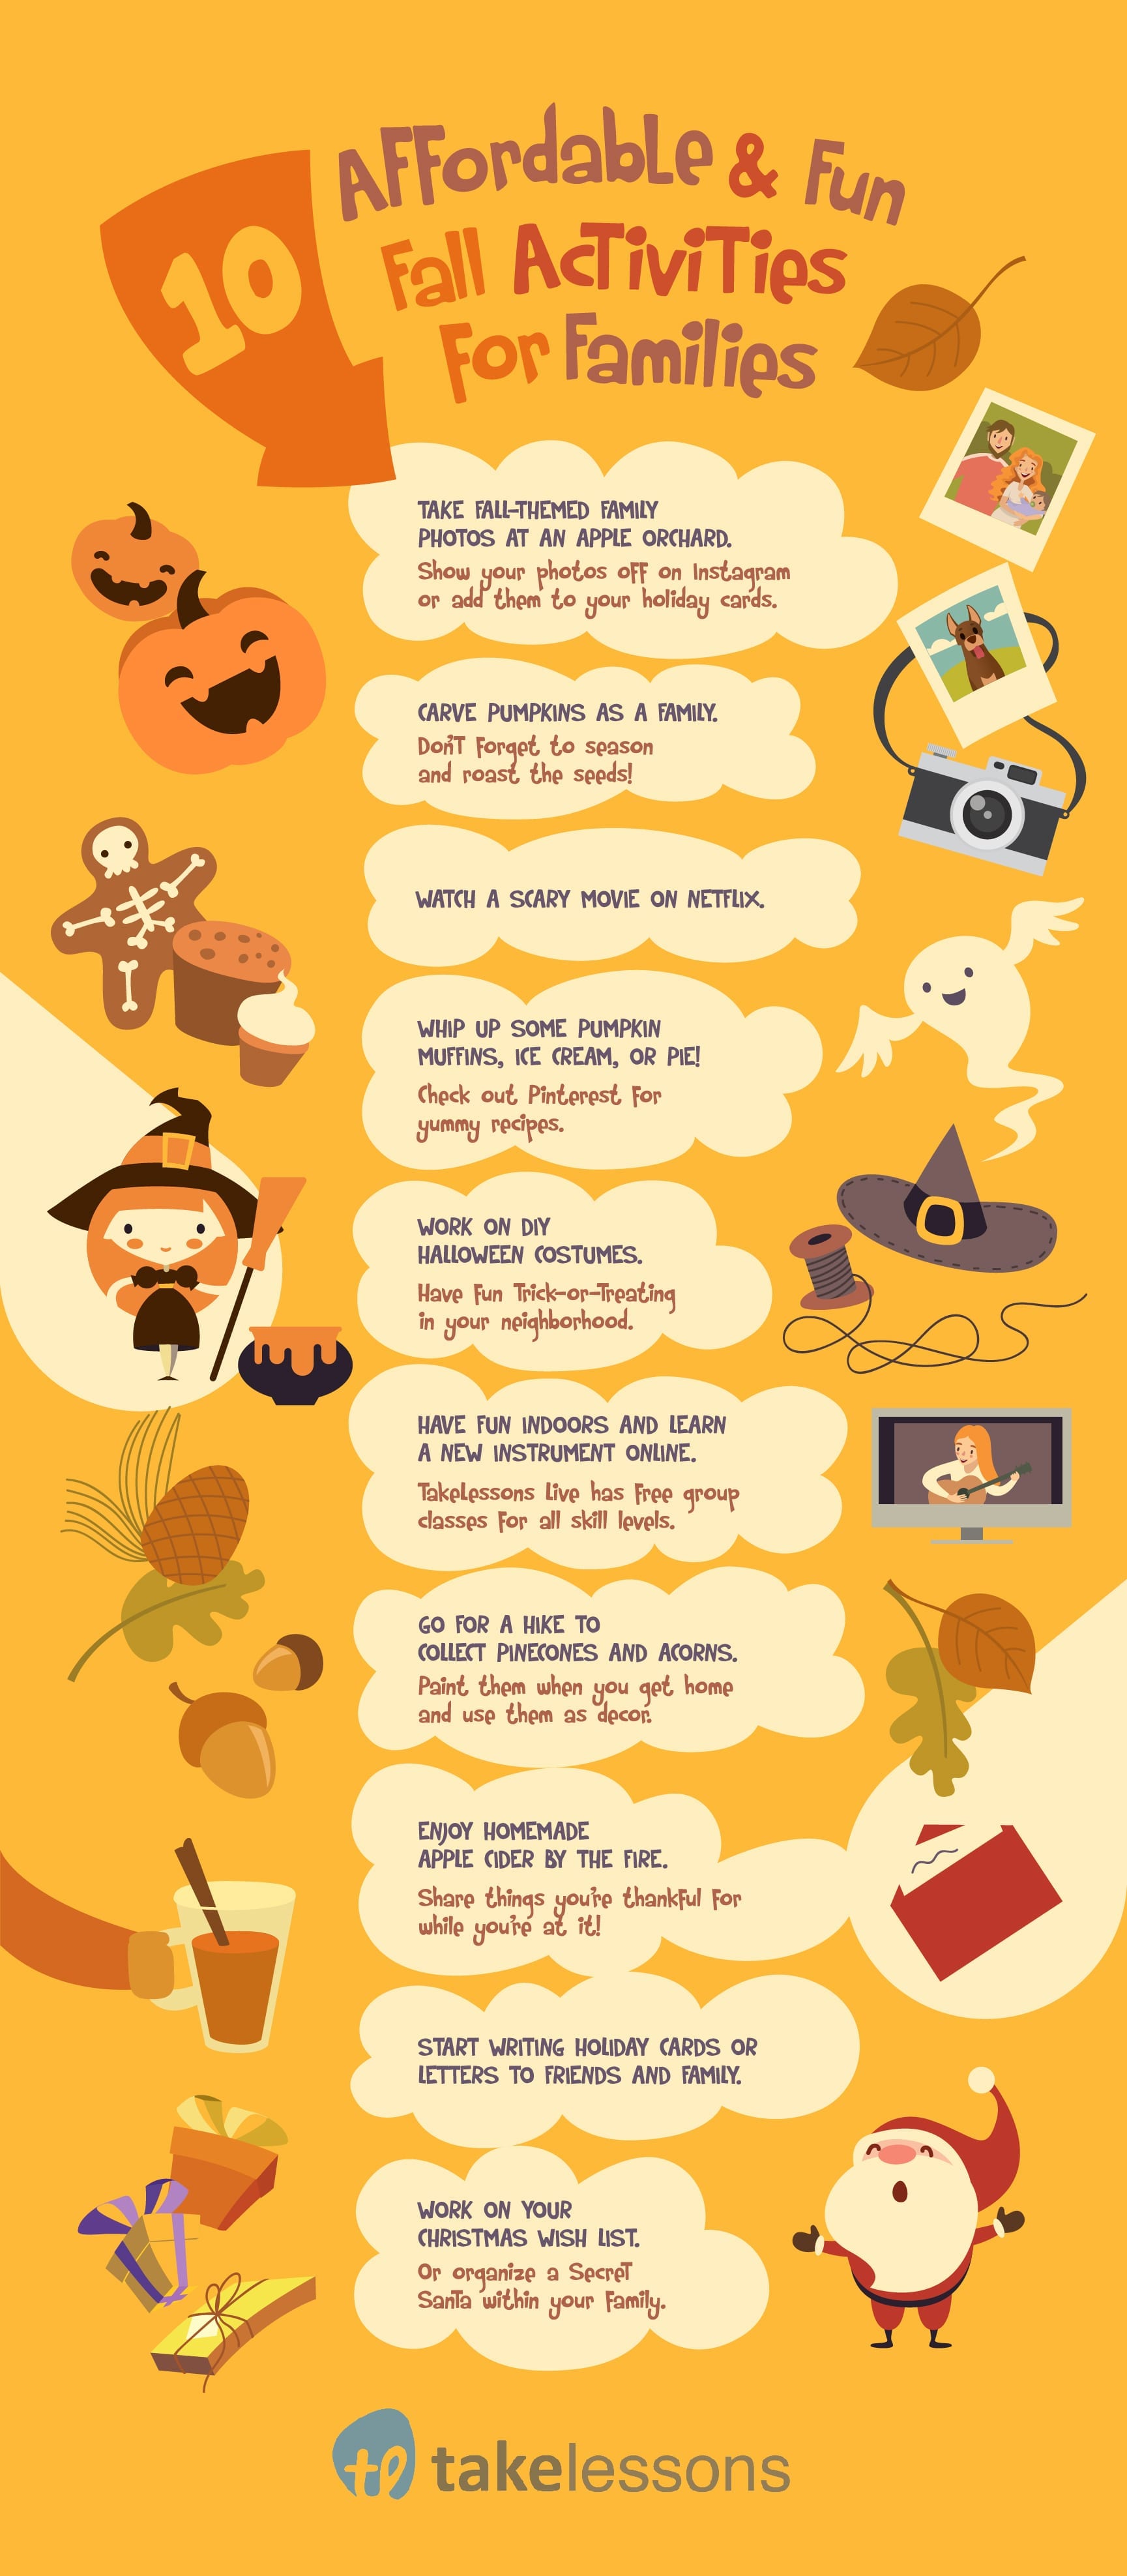 10-affordable-fun-fall-activities-for-families-infographic